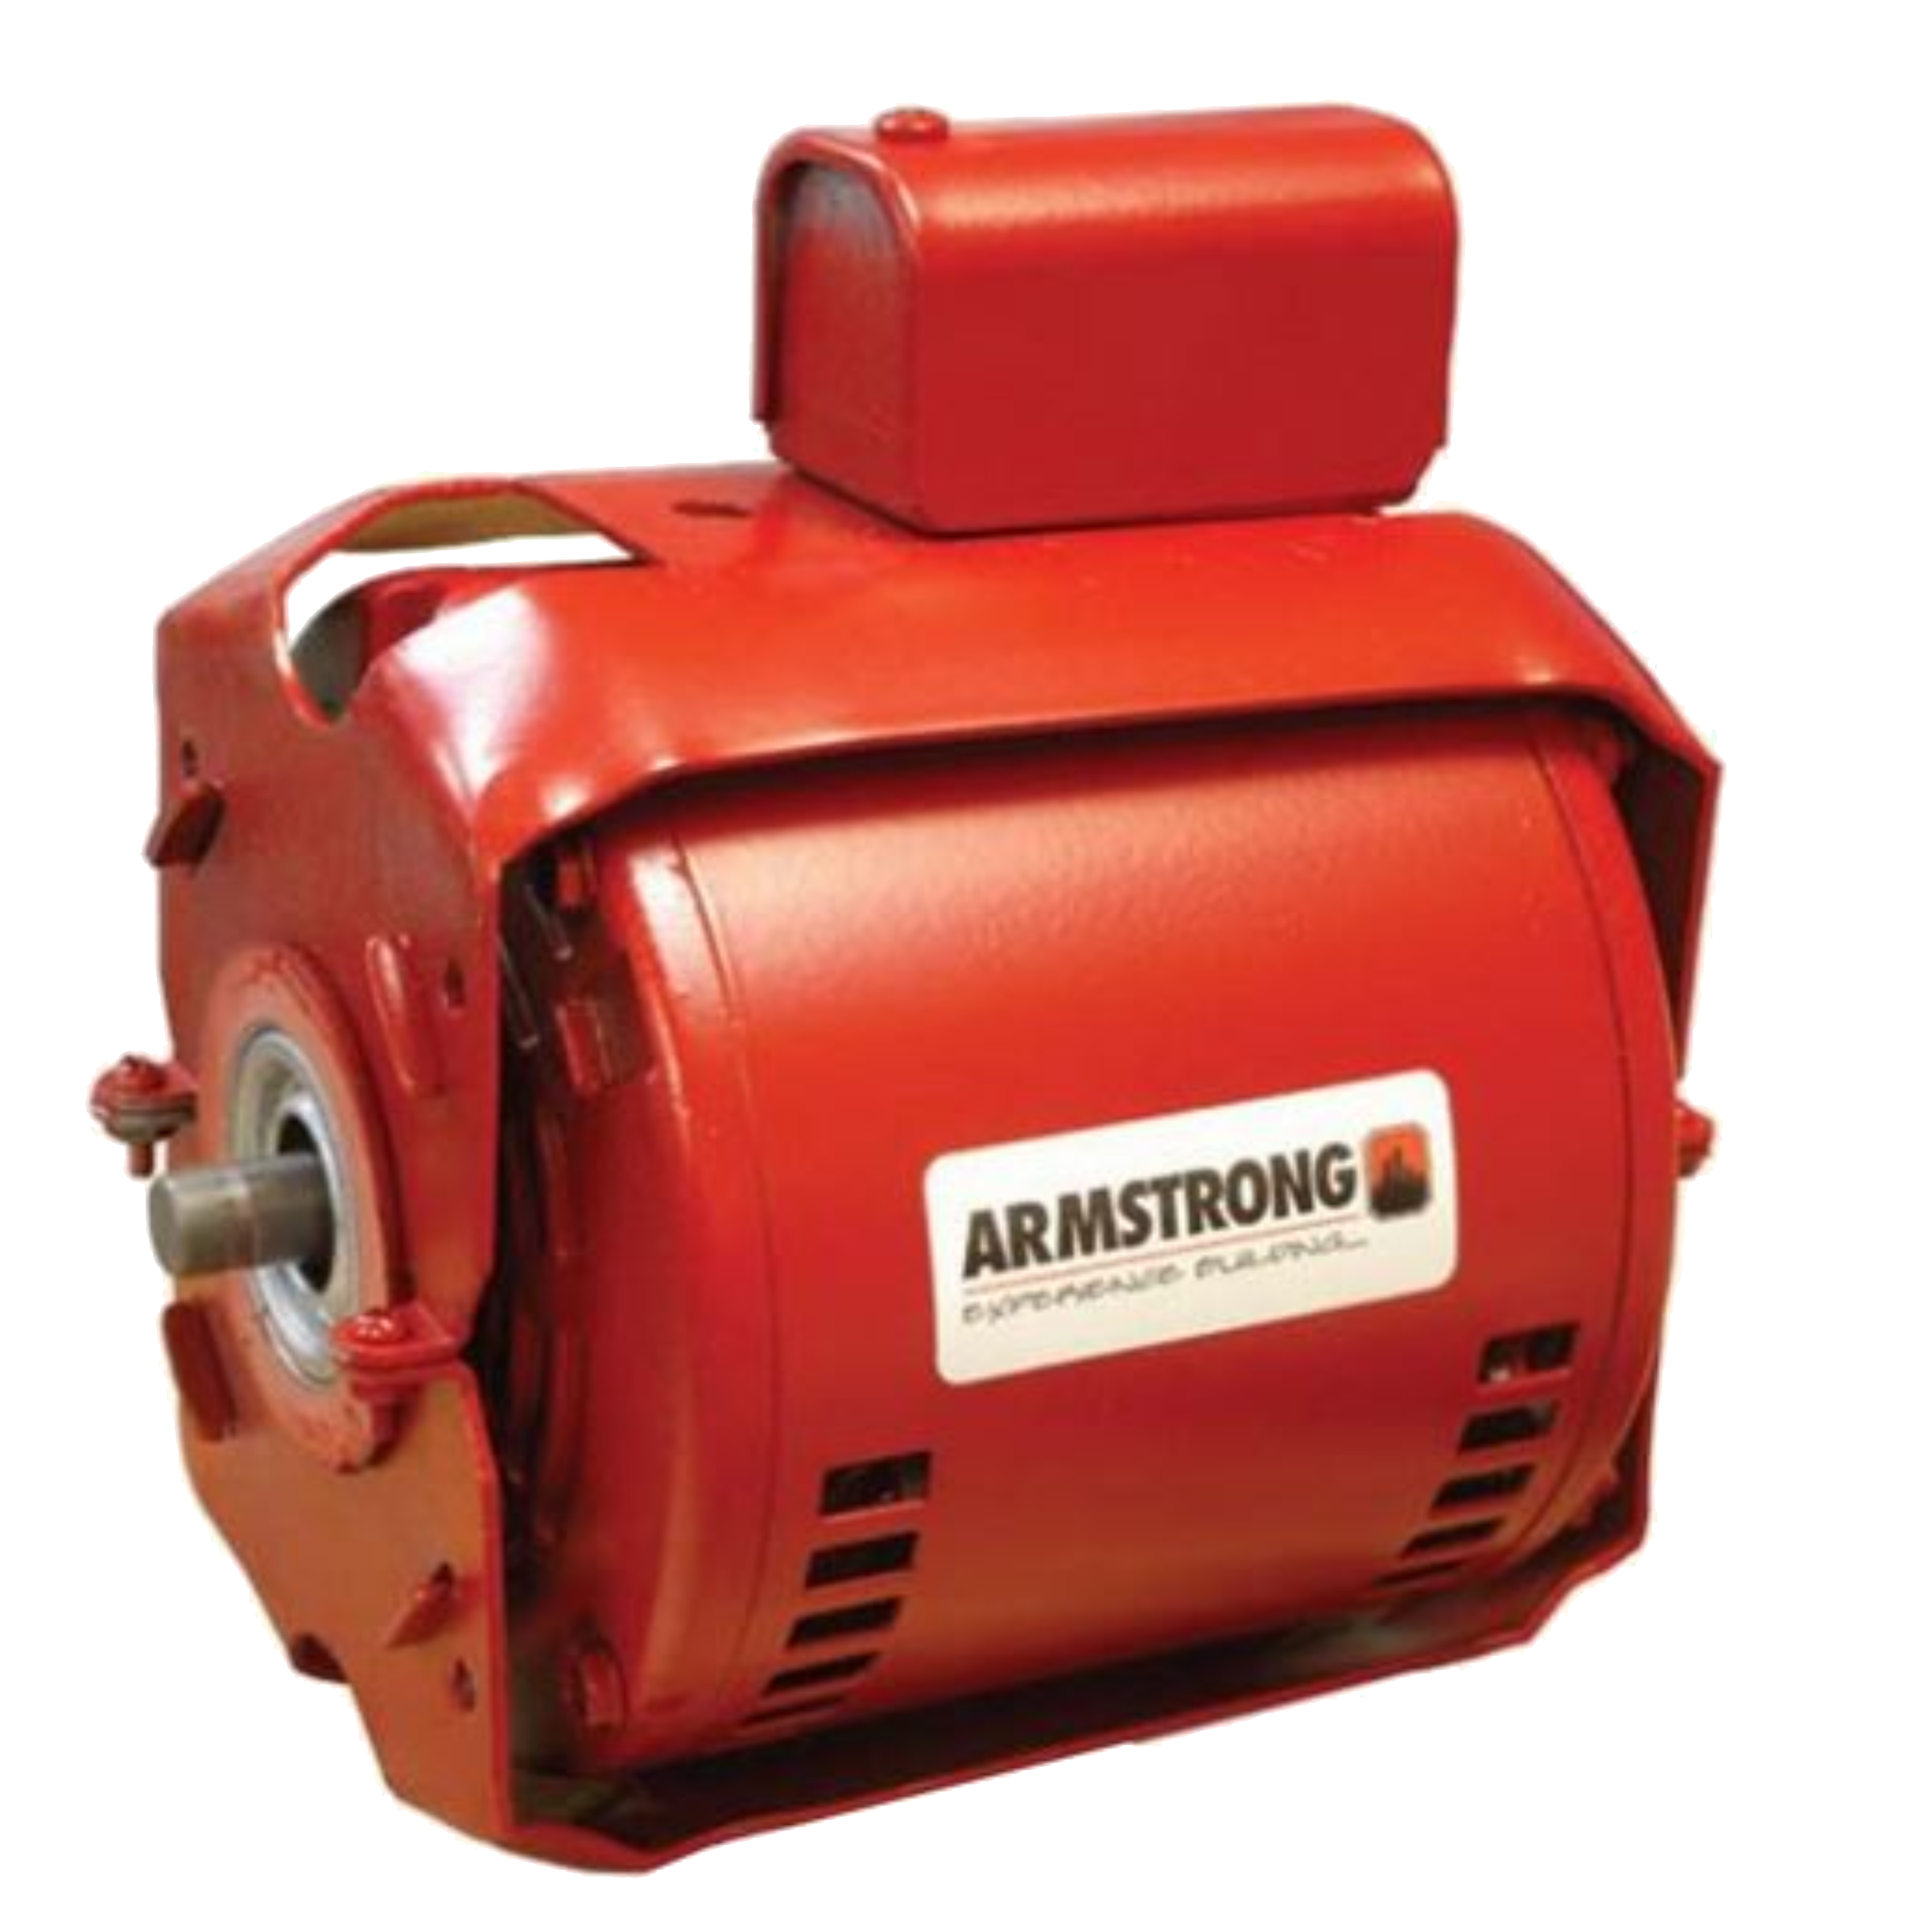 Armstrong 817025-001 Replacement Motor, 115V at 60 Hz, 1 PH, 1/6 hp, 1750 RPM